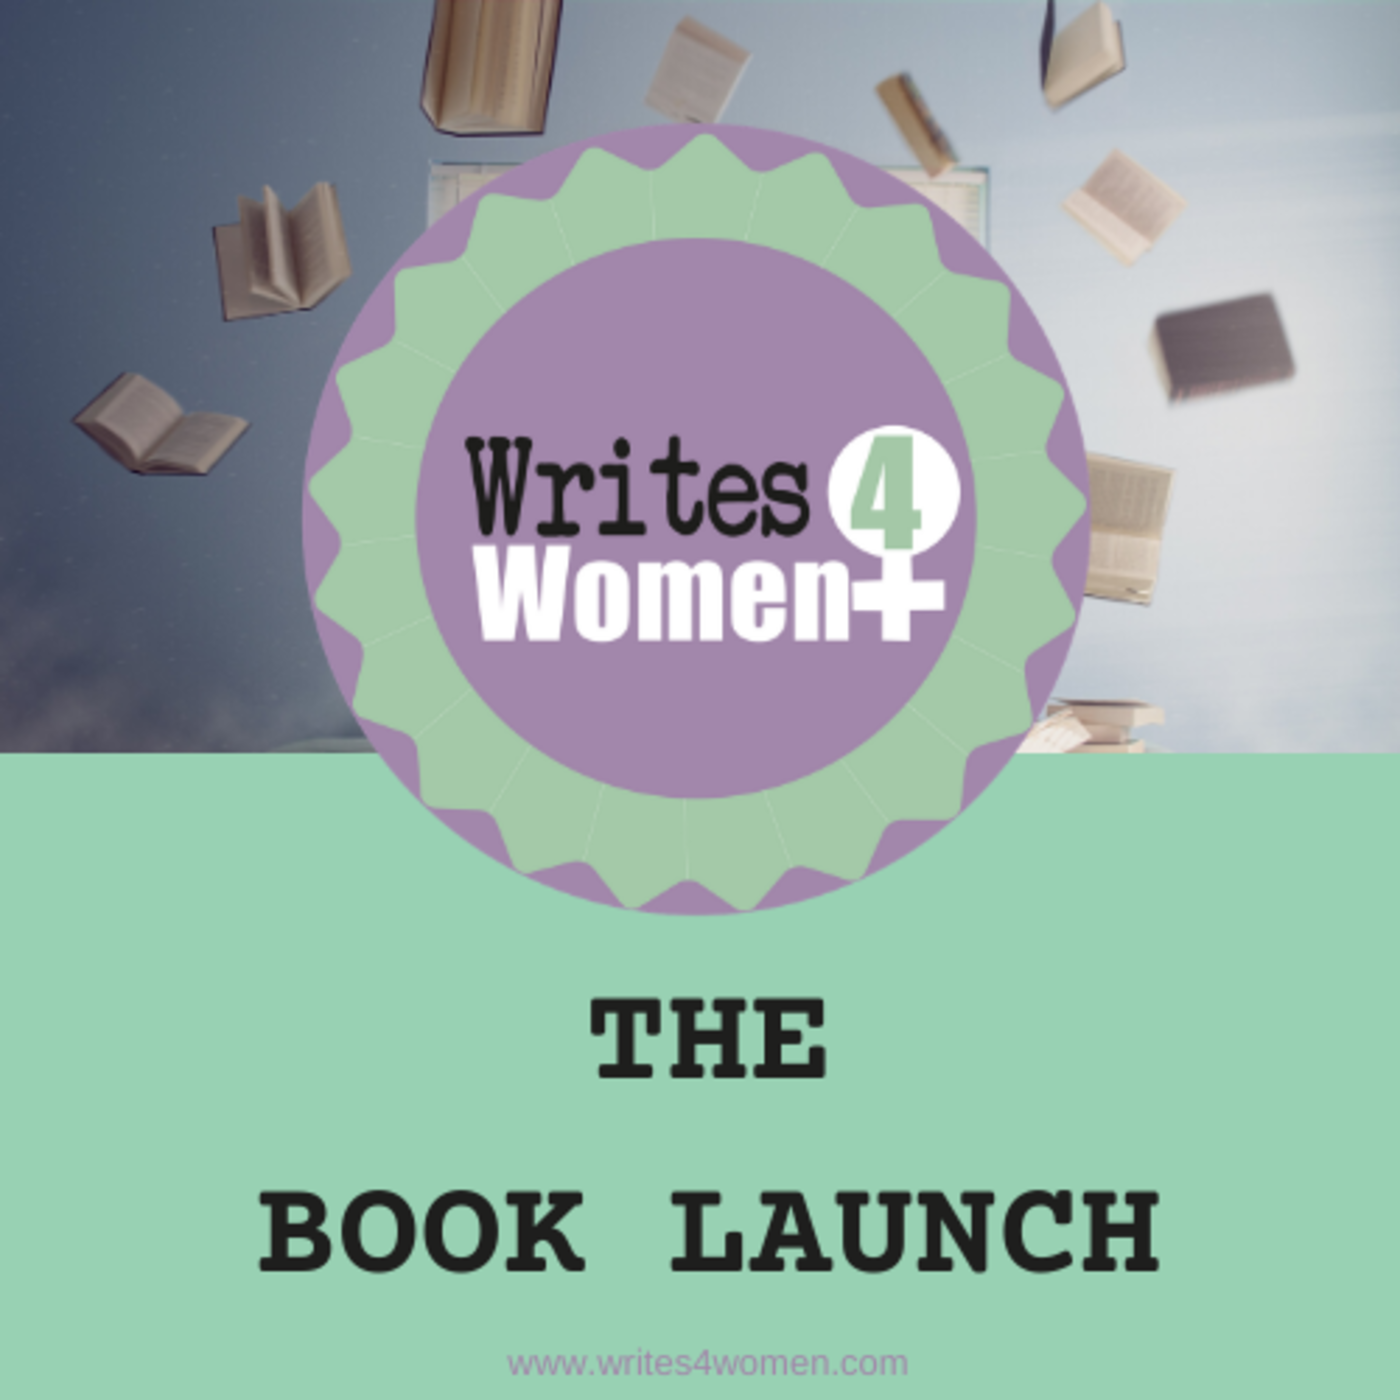 W4W BOOK LAUNCH - Sarah Brill "Symphony for the Man"